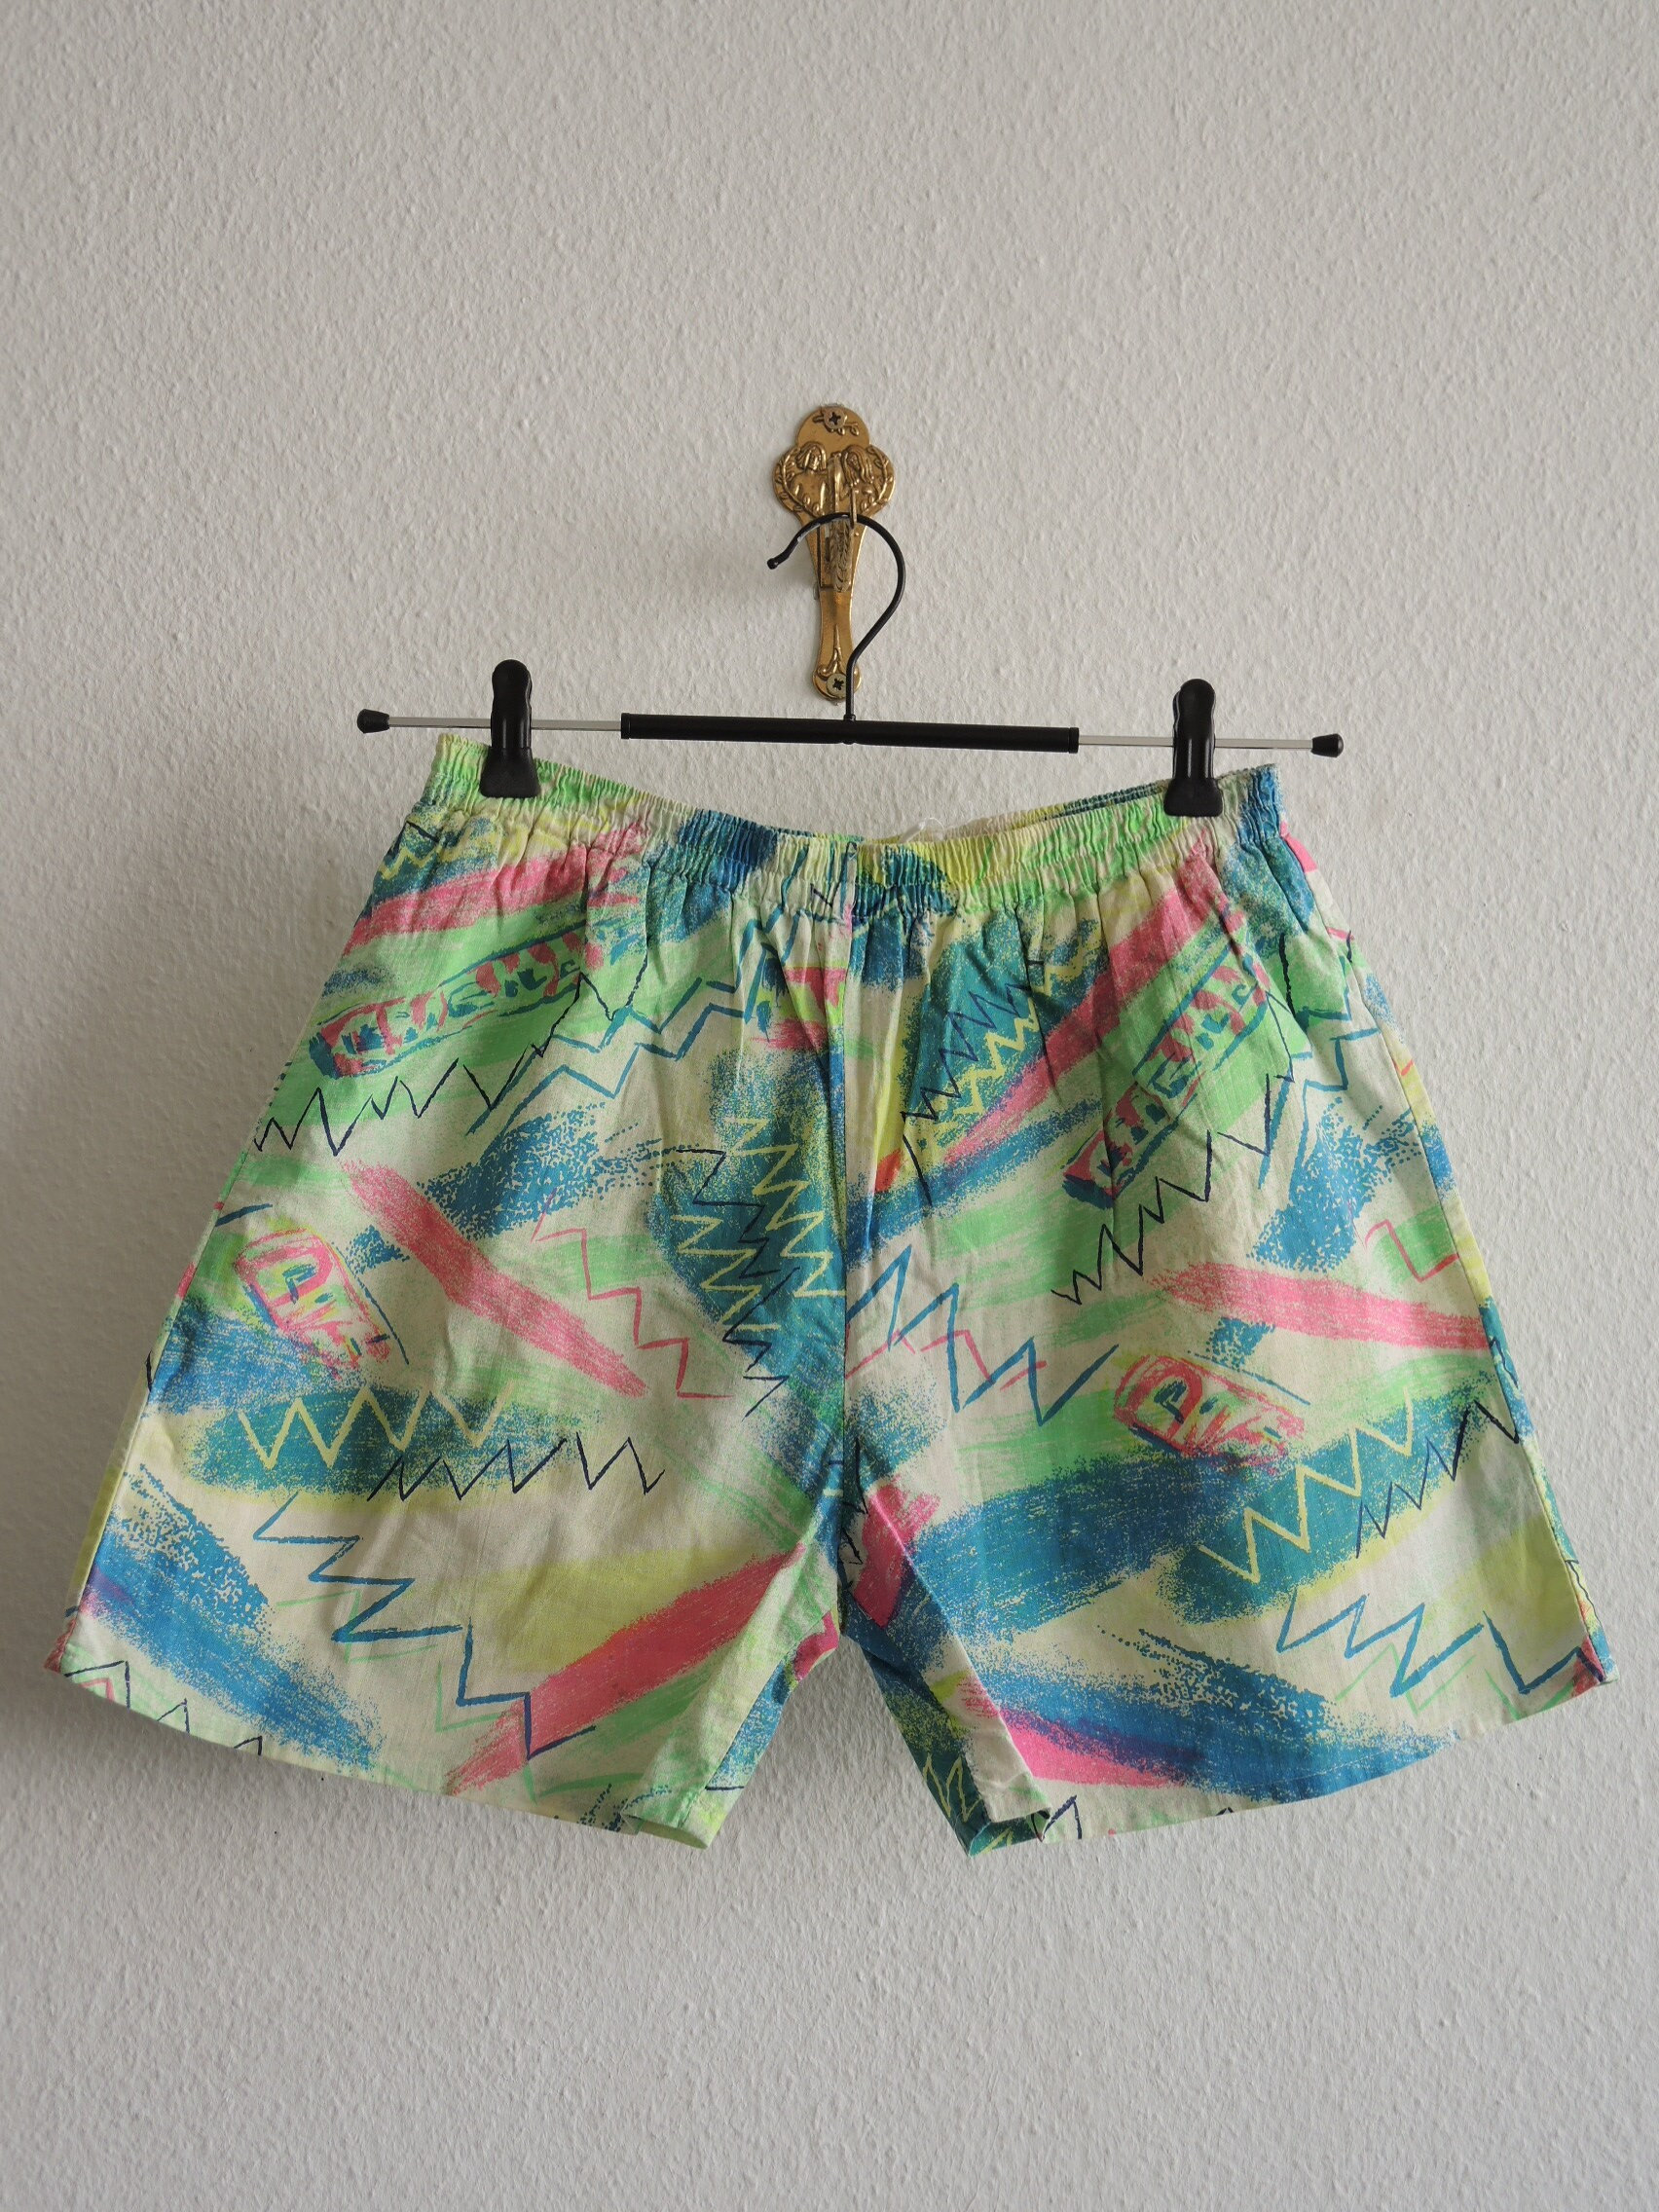 80s Vintage Swimming Trunks Shorts L/XL Green Pink Blue Neon